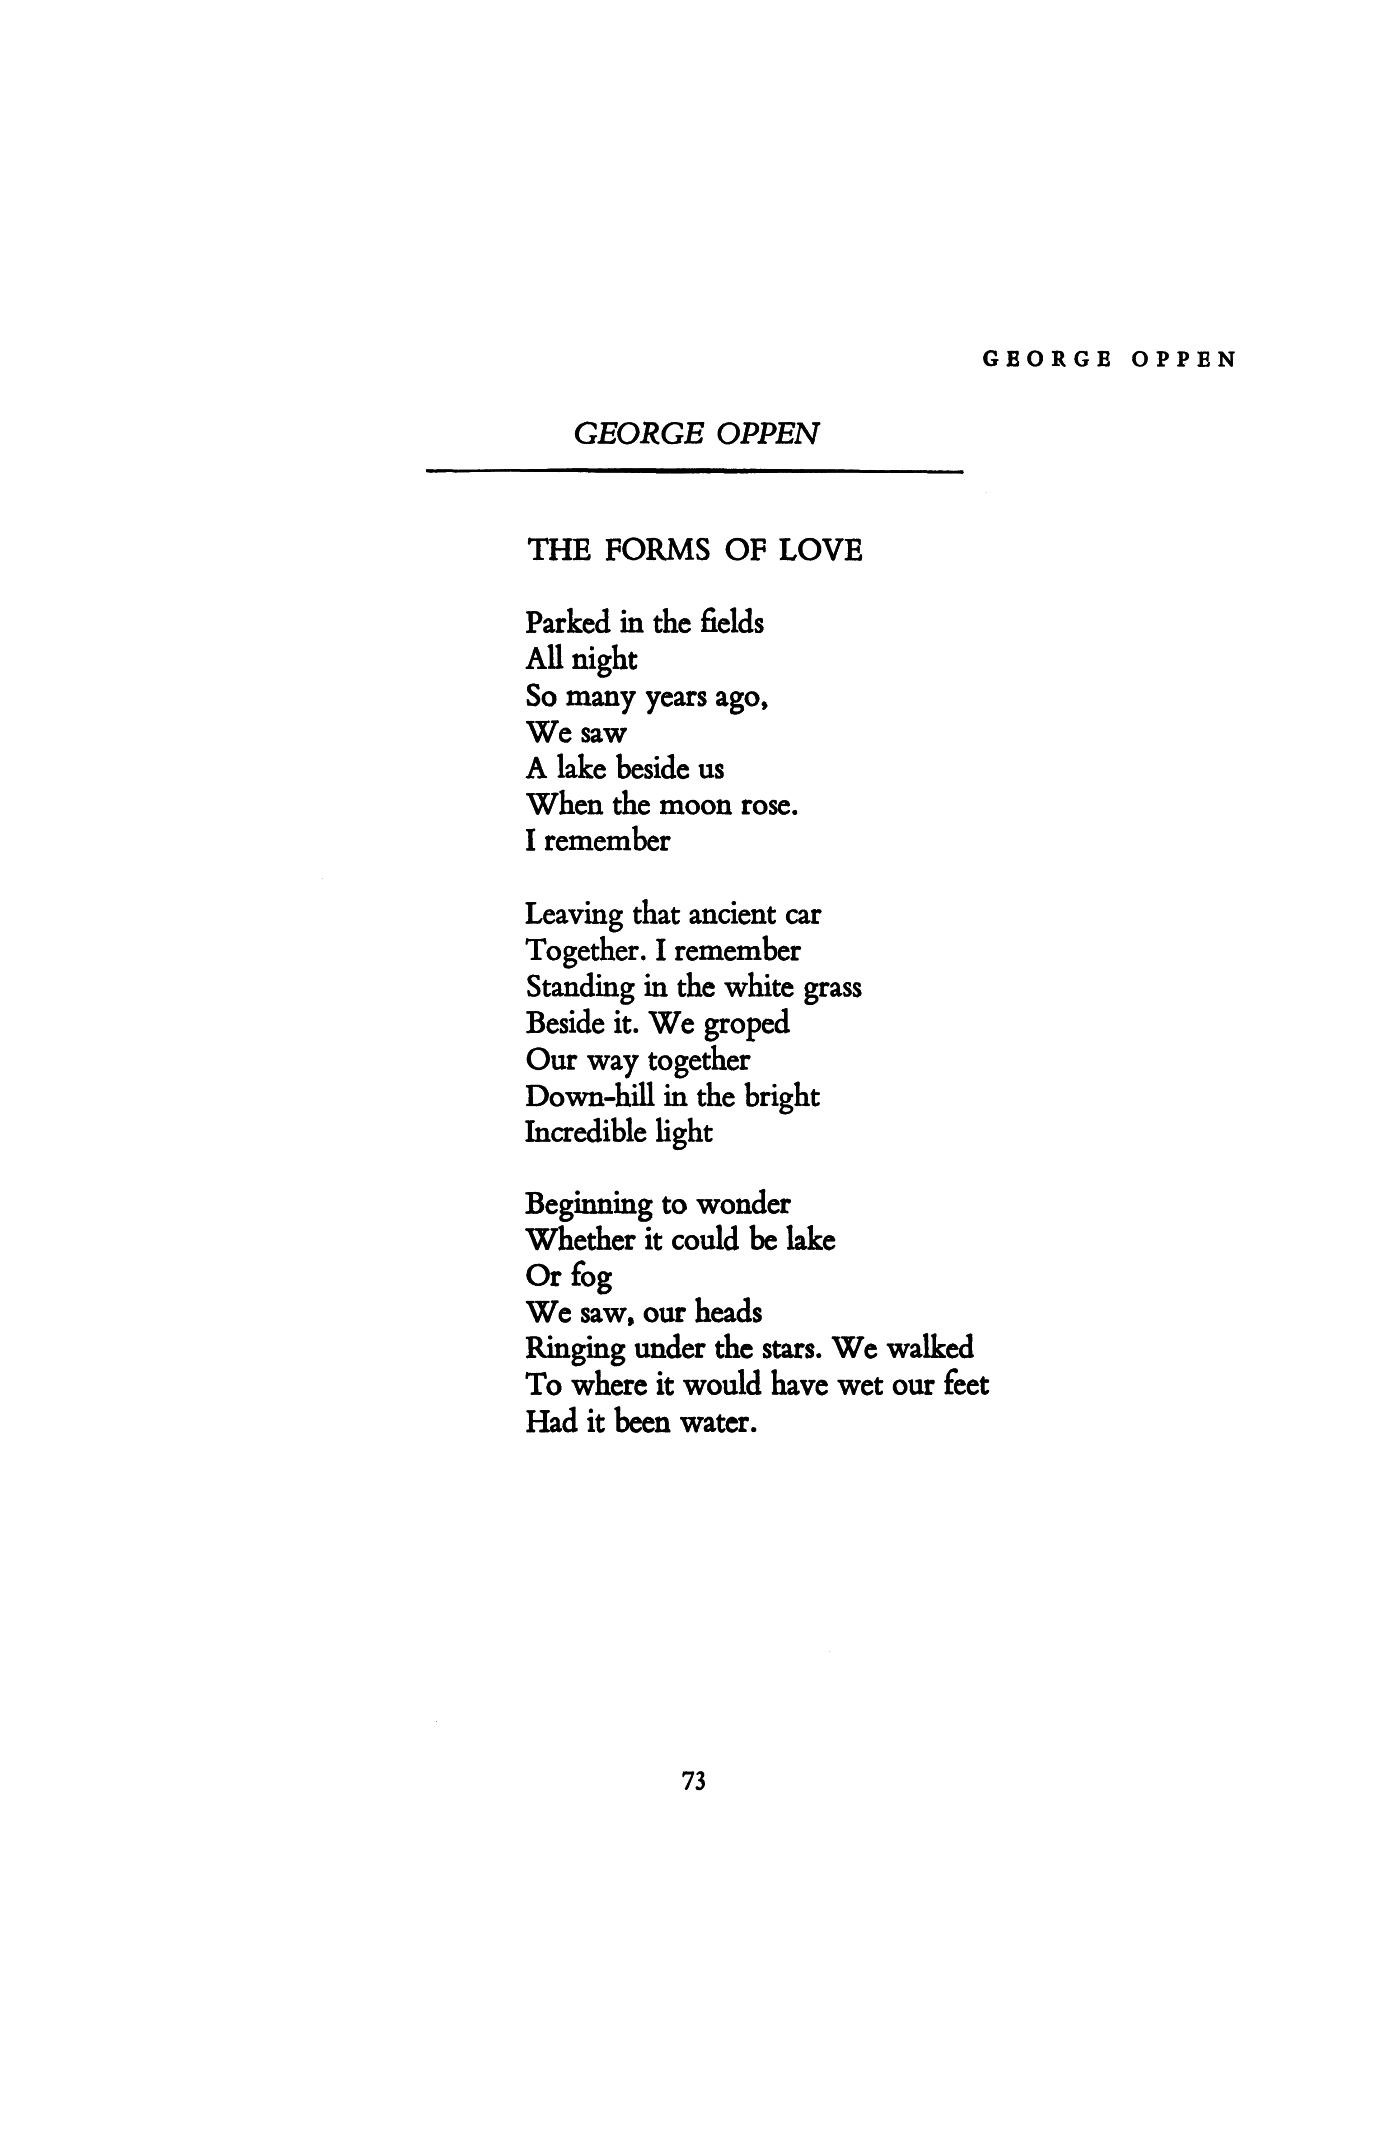 The Forms of Love by George Oppen